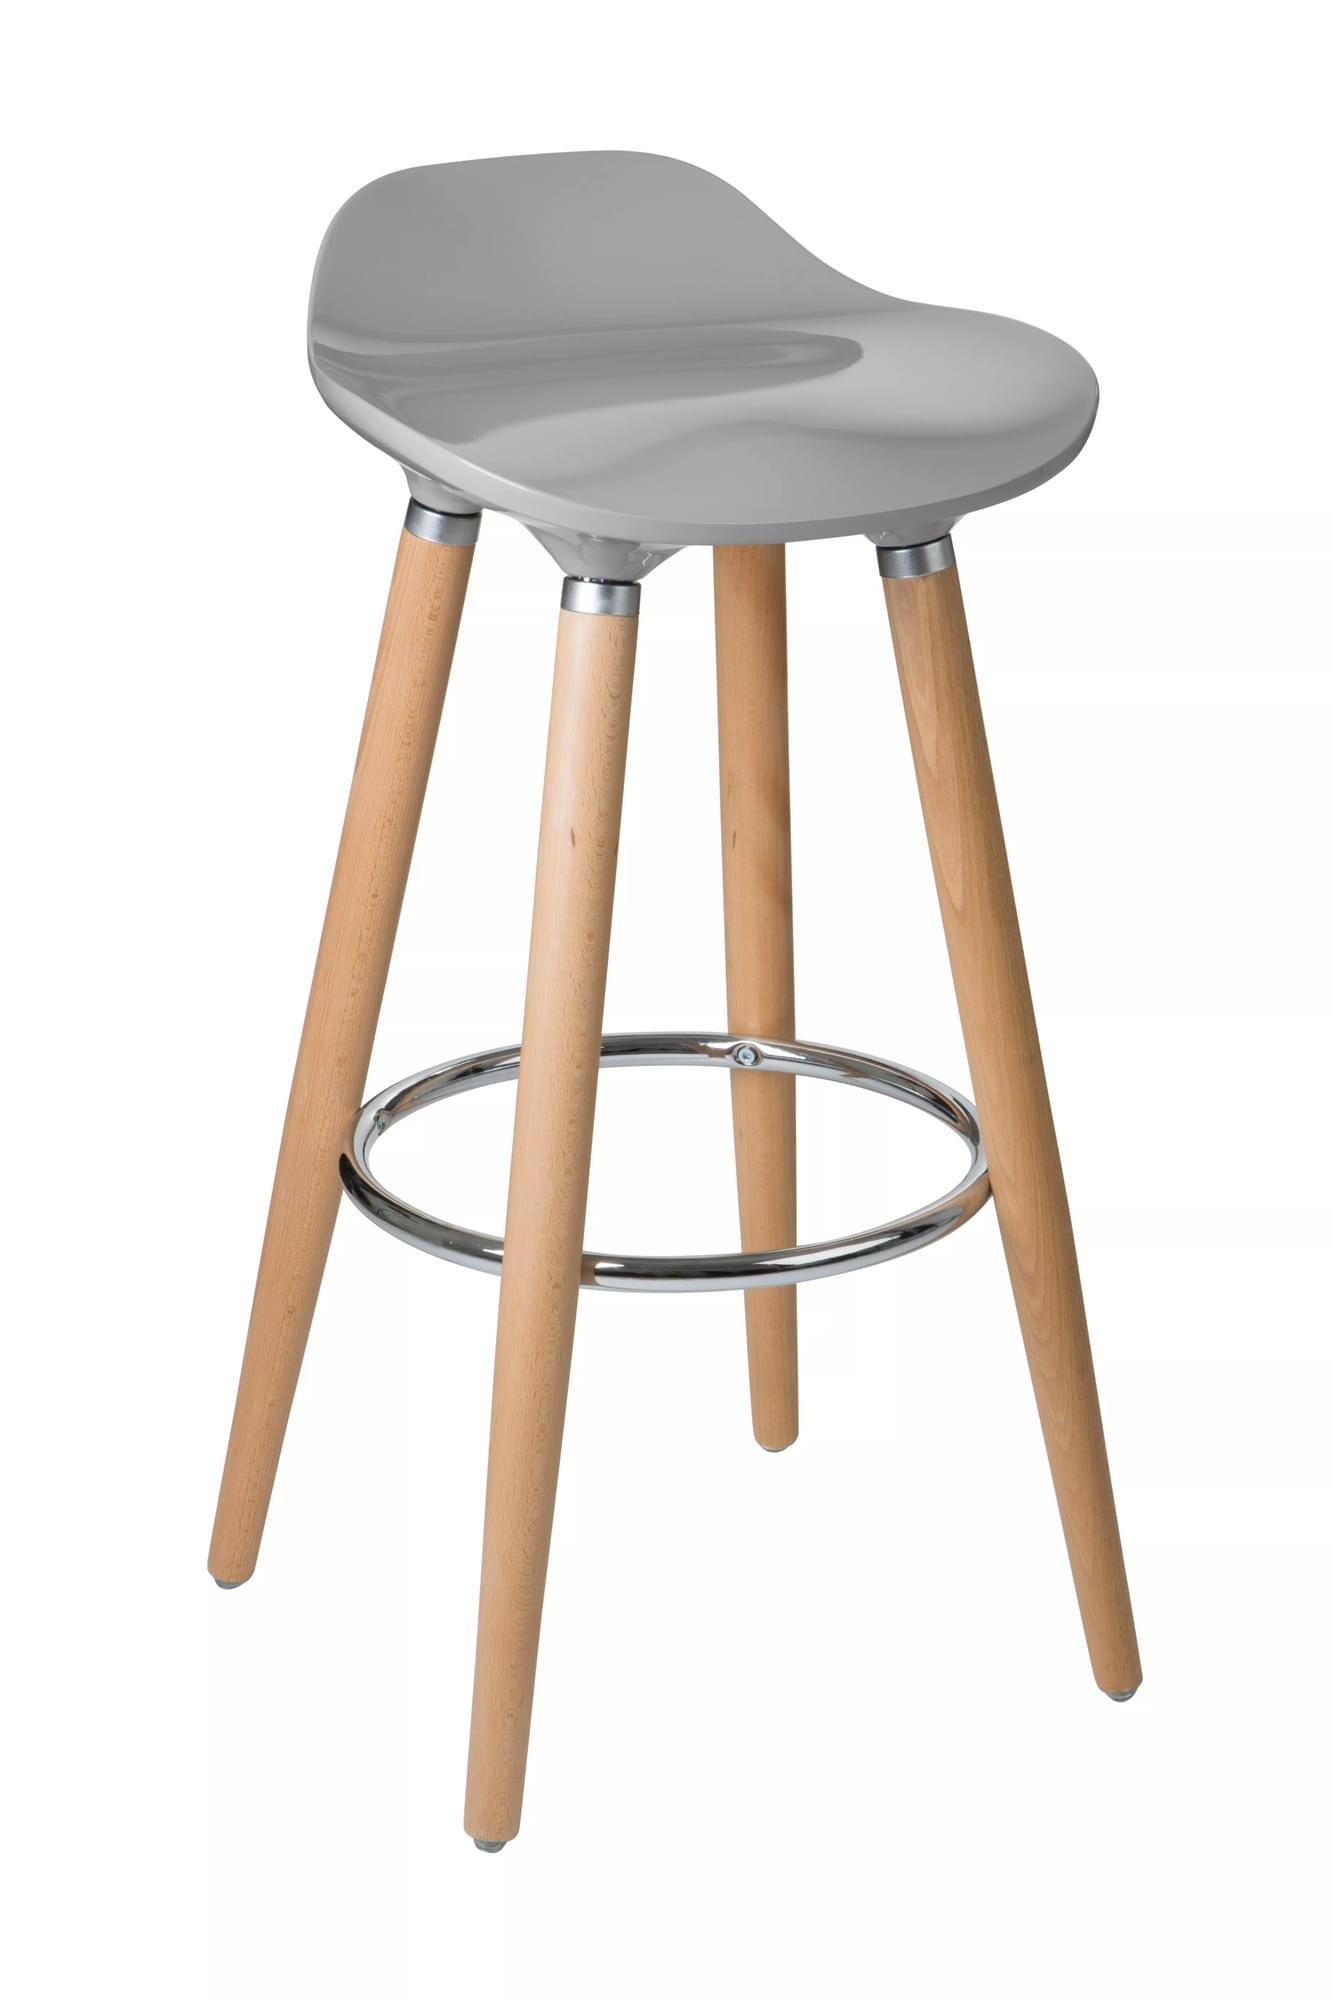 Interiors by Premier Grey Bar Stool, Space-Saving Kitchen Stool, Easy to Clean Breakfast Bar Stool, 